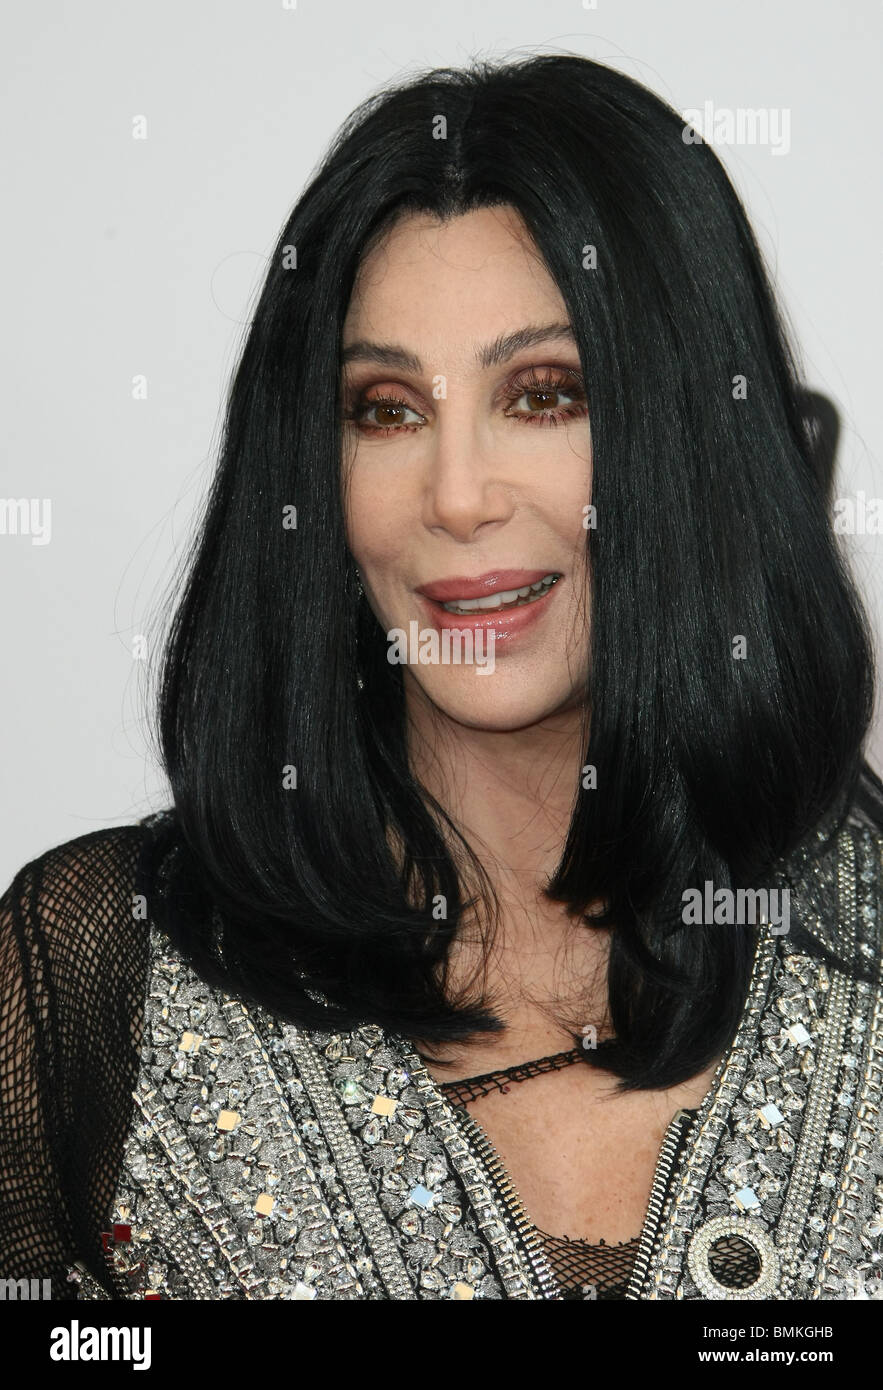 CHER TV LAND PRESENTS THE AFI LIFE ACHIEVEMENT AWARD HONORING MIKE NICHOLS CULVER CITY LOS ANGELES CA 10 June 2010 Stock Photo